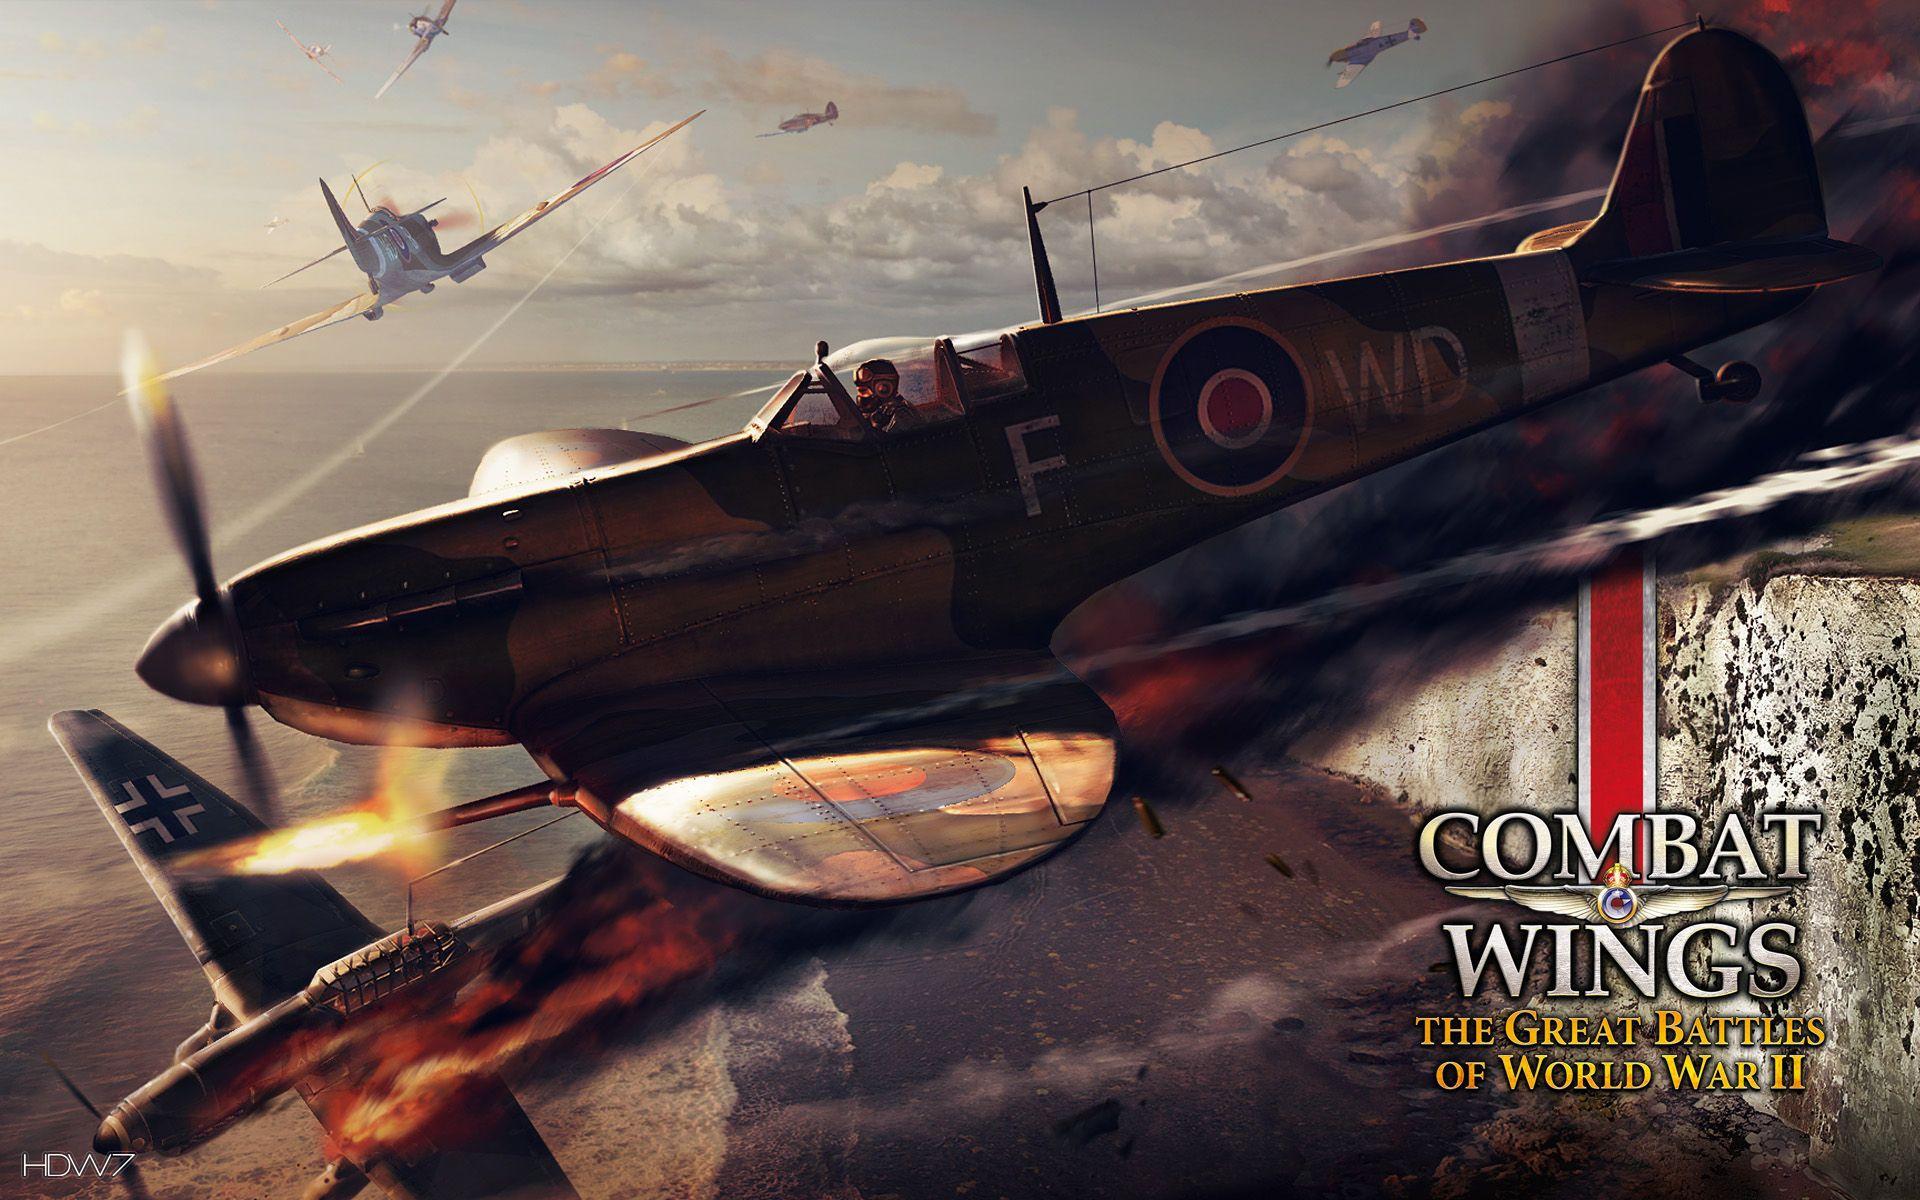 Battle wings. Игра Combat Wings. Ворлд вар 2 батл комбат. Combat Wings the great Battles of WWII. Combat aircraft игра.